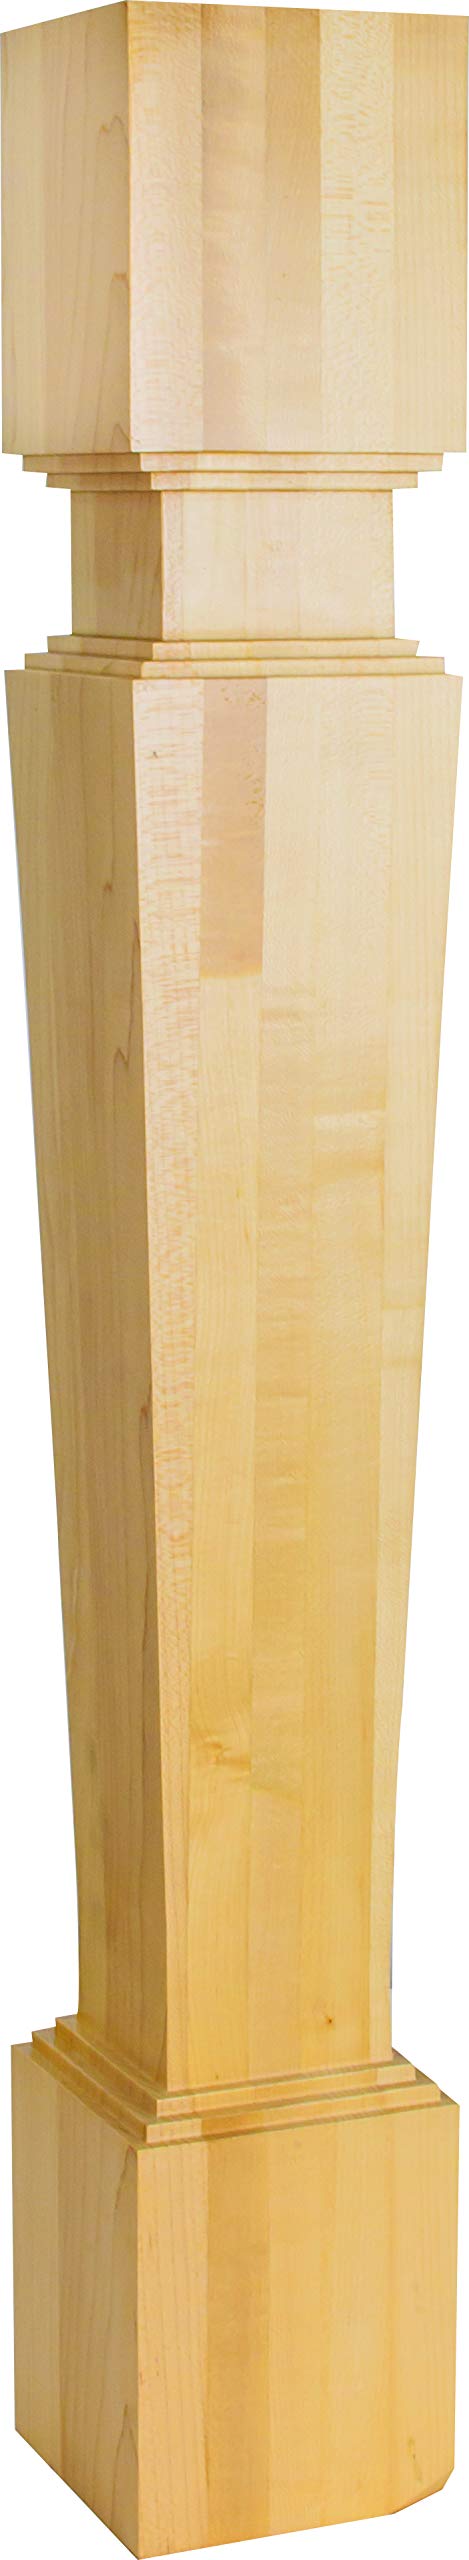 Hardware Resources P35-3.5-CH 3-1/2" W x 3-1/2" D x 35-1/2" H Cherry Square Post